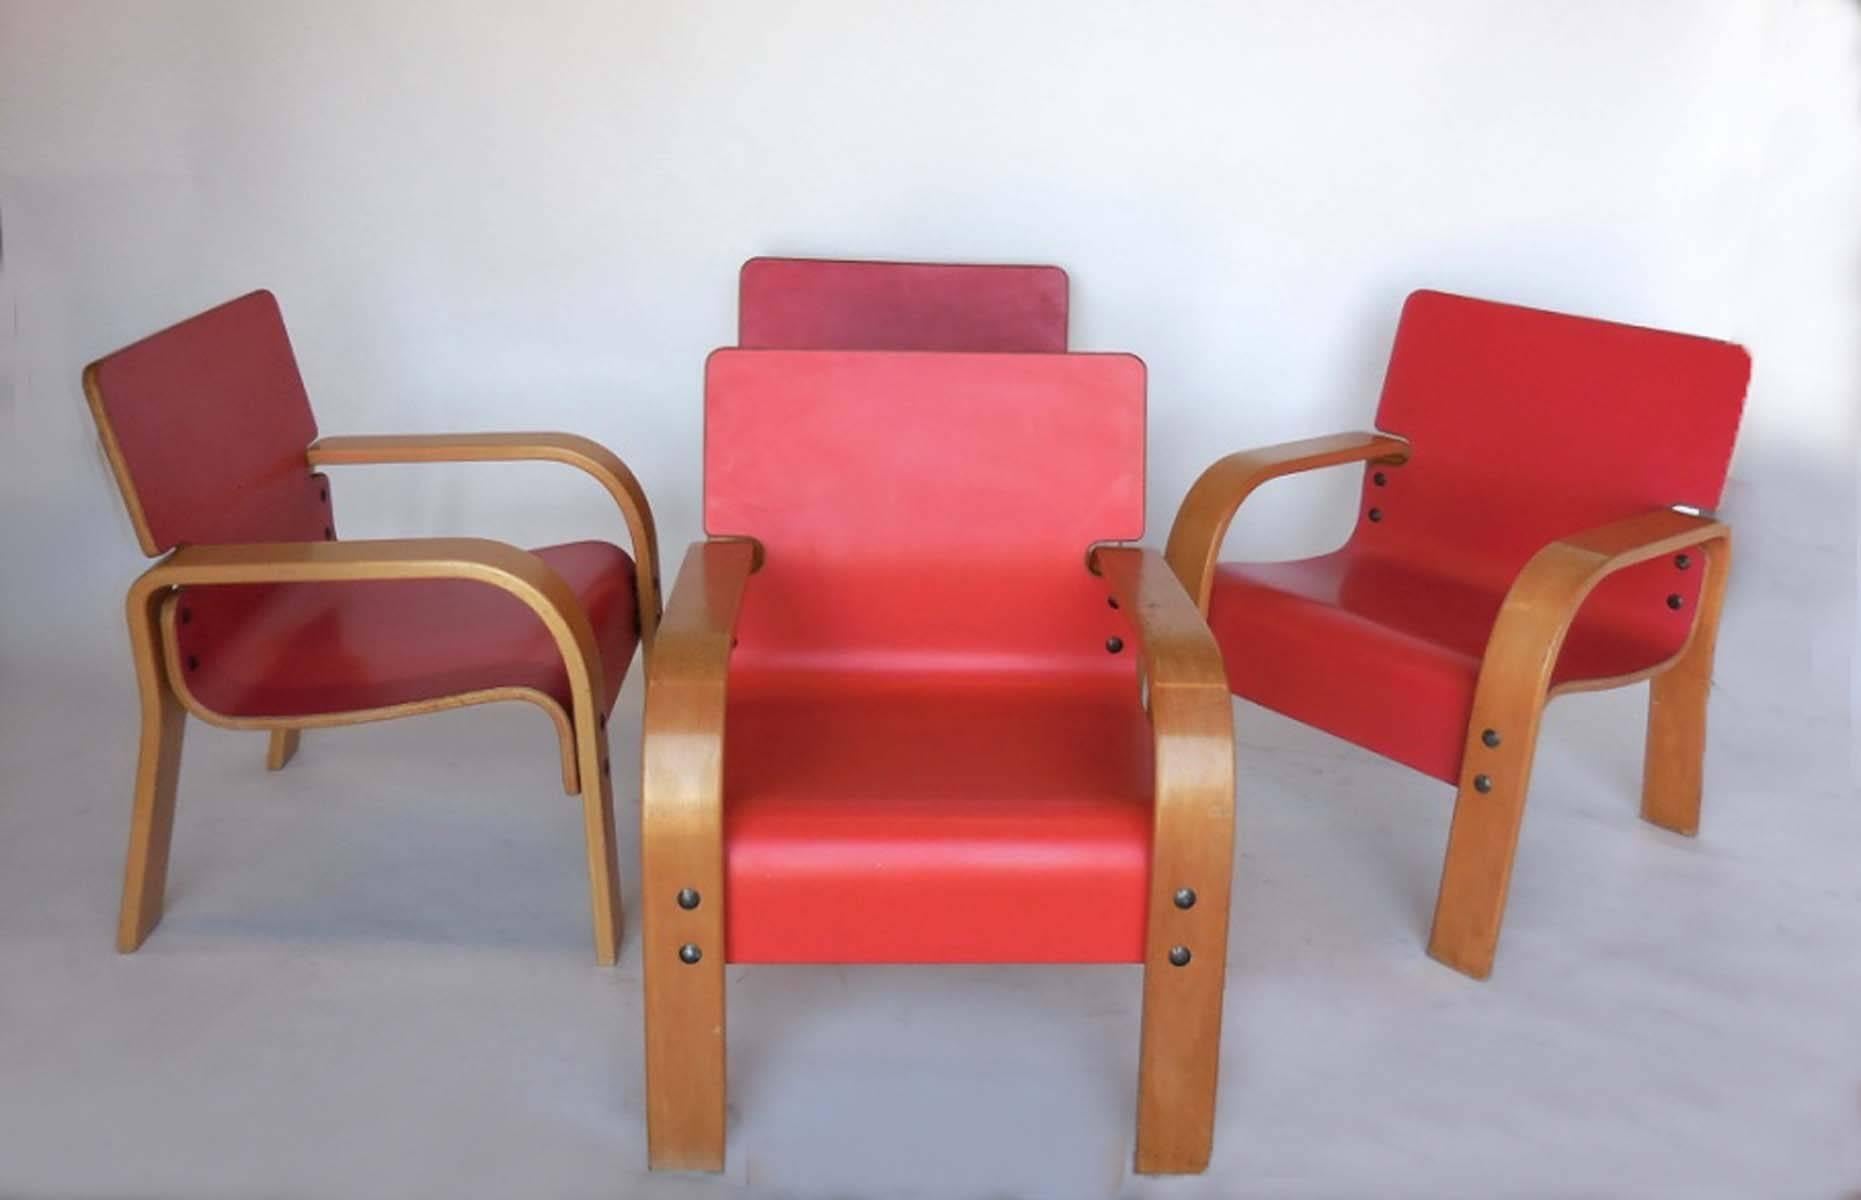 Four bent plywood coral/orange lounge chairs from the 1970s. In very good shape with very little wear. One chair is a bit lighter than the others.
Can be sold separately.